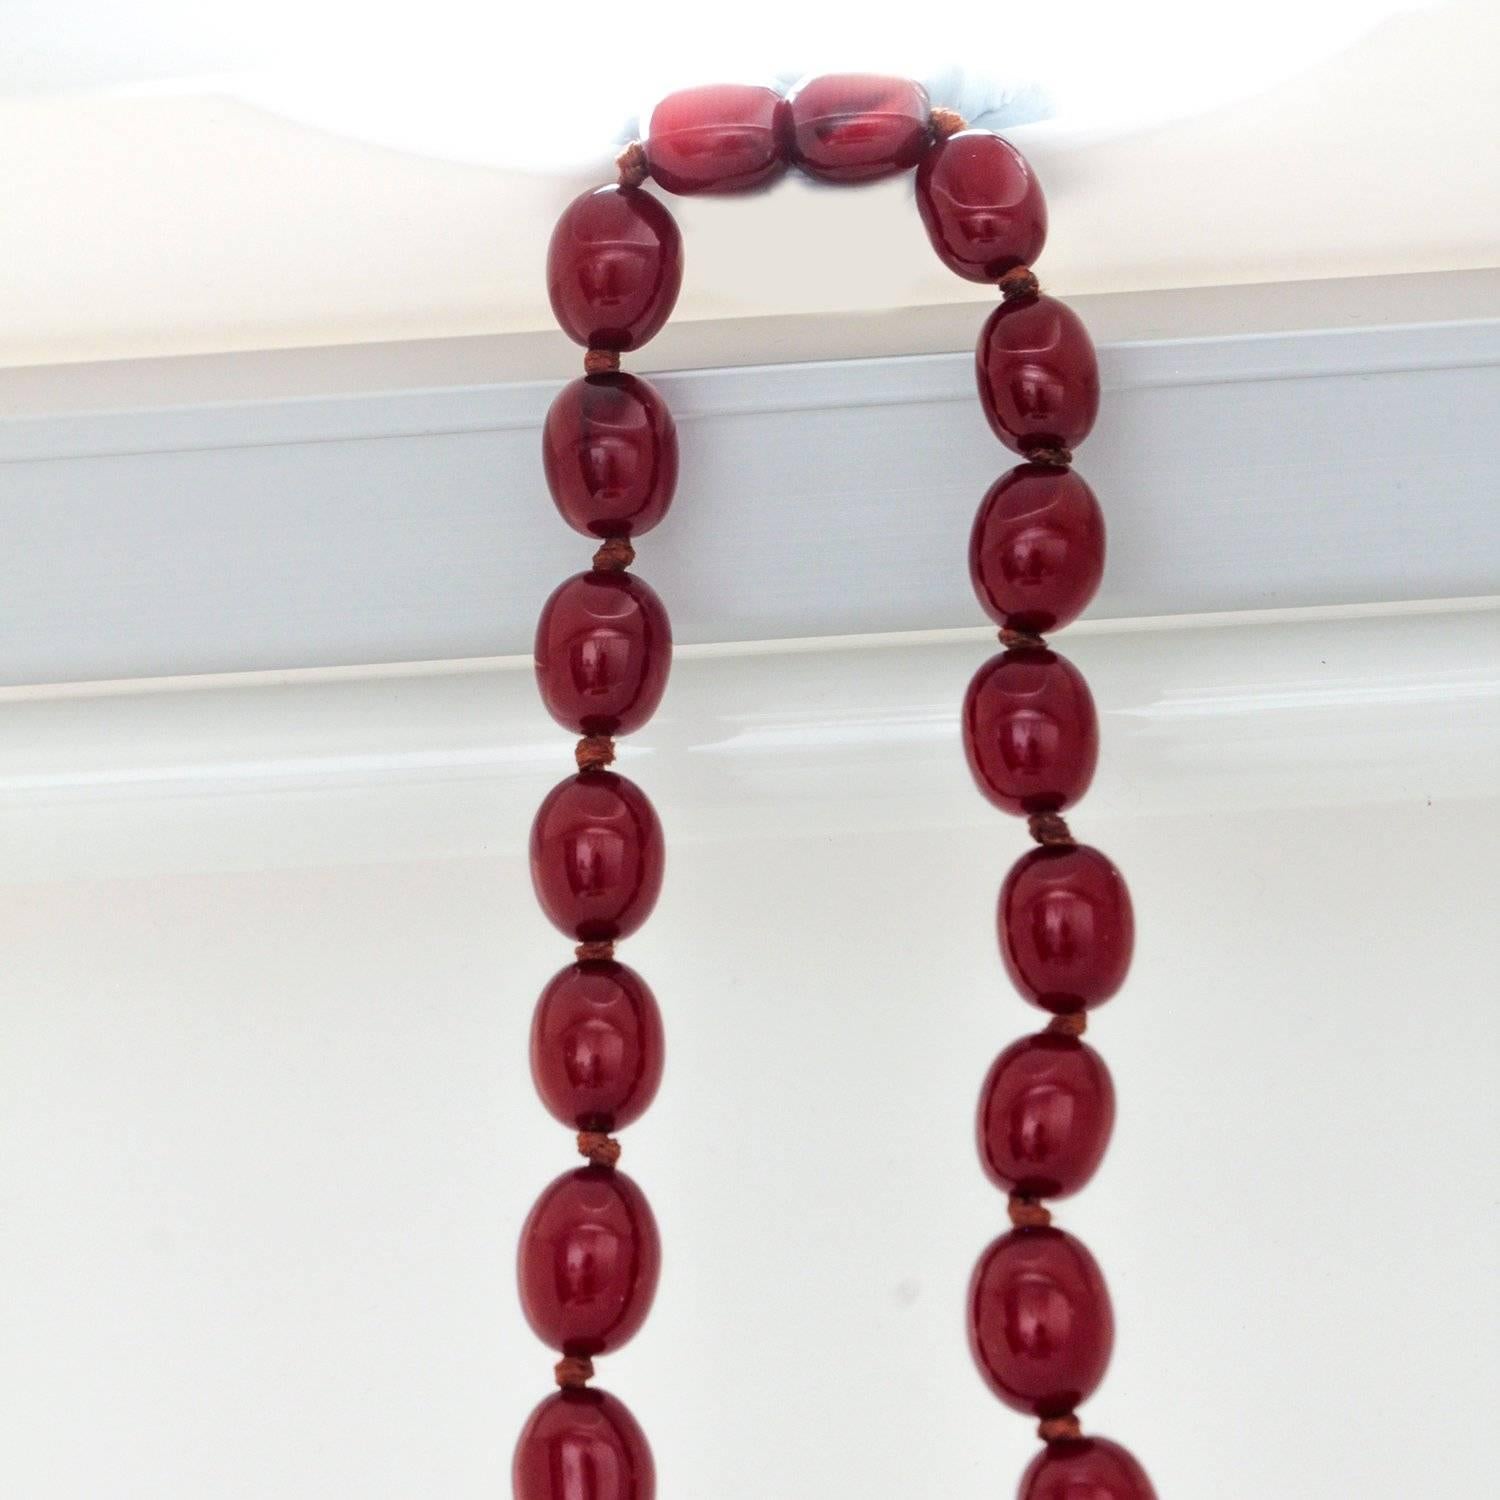 Antique Amber Colored Bakelite and Wood - like Beaded Choker Necklace In Excellent Condition For Sale In Balmain, AU